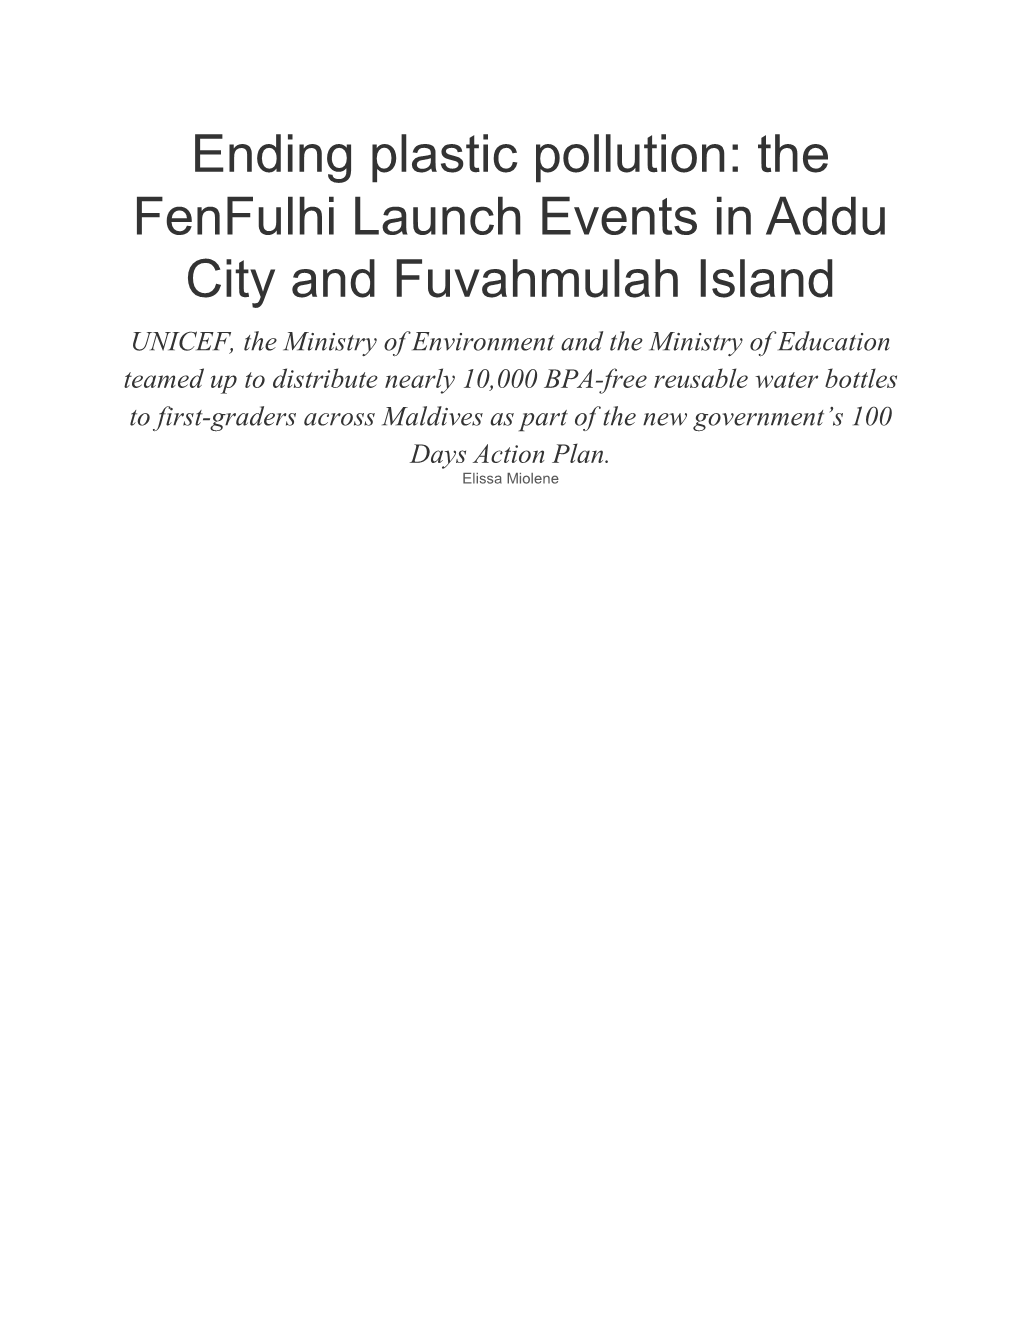 Ending Plastic Pollution: the Fenfulhi Launch Events in Addu City And